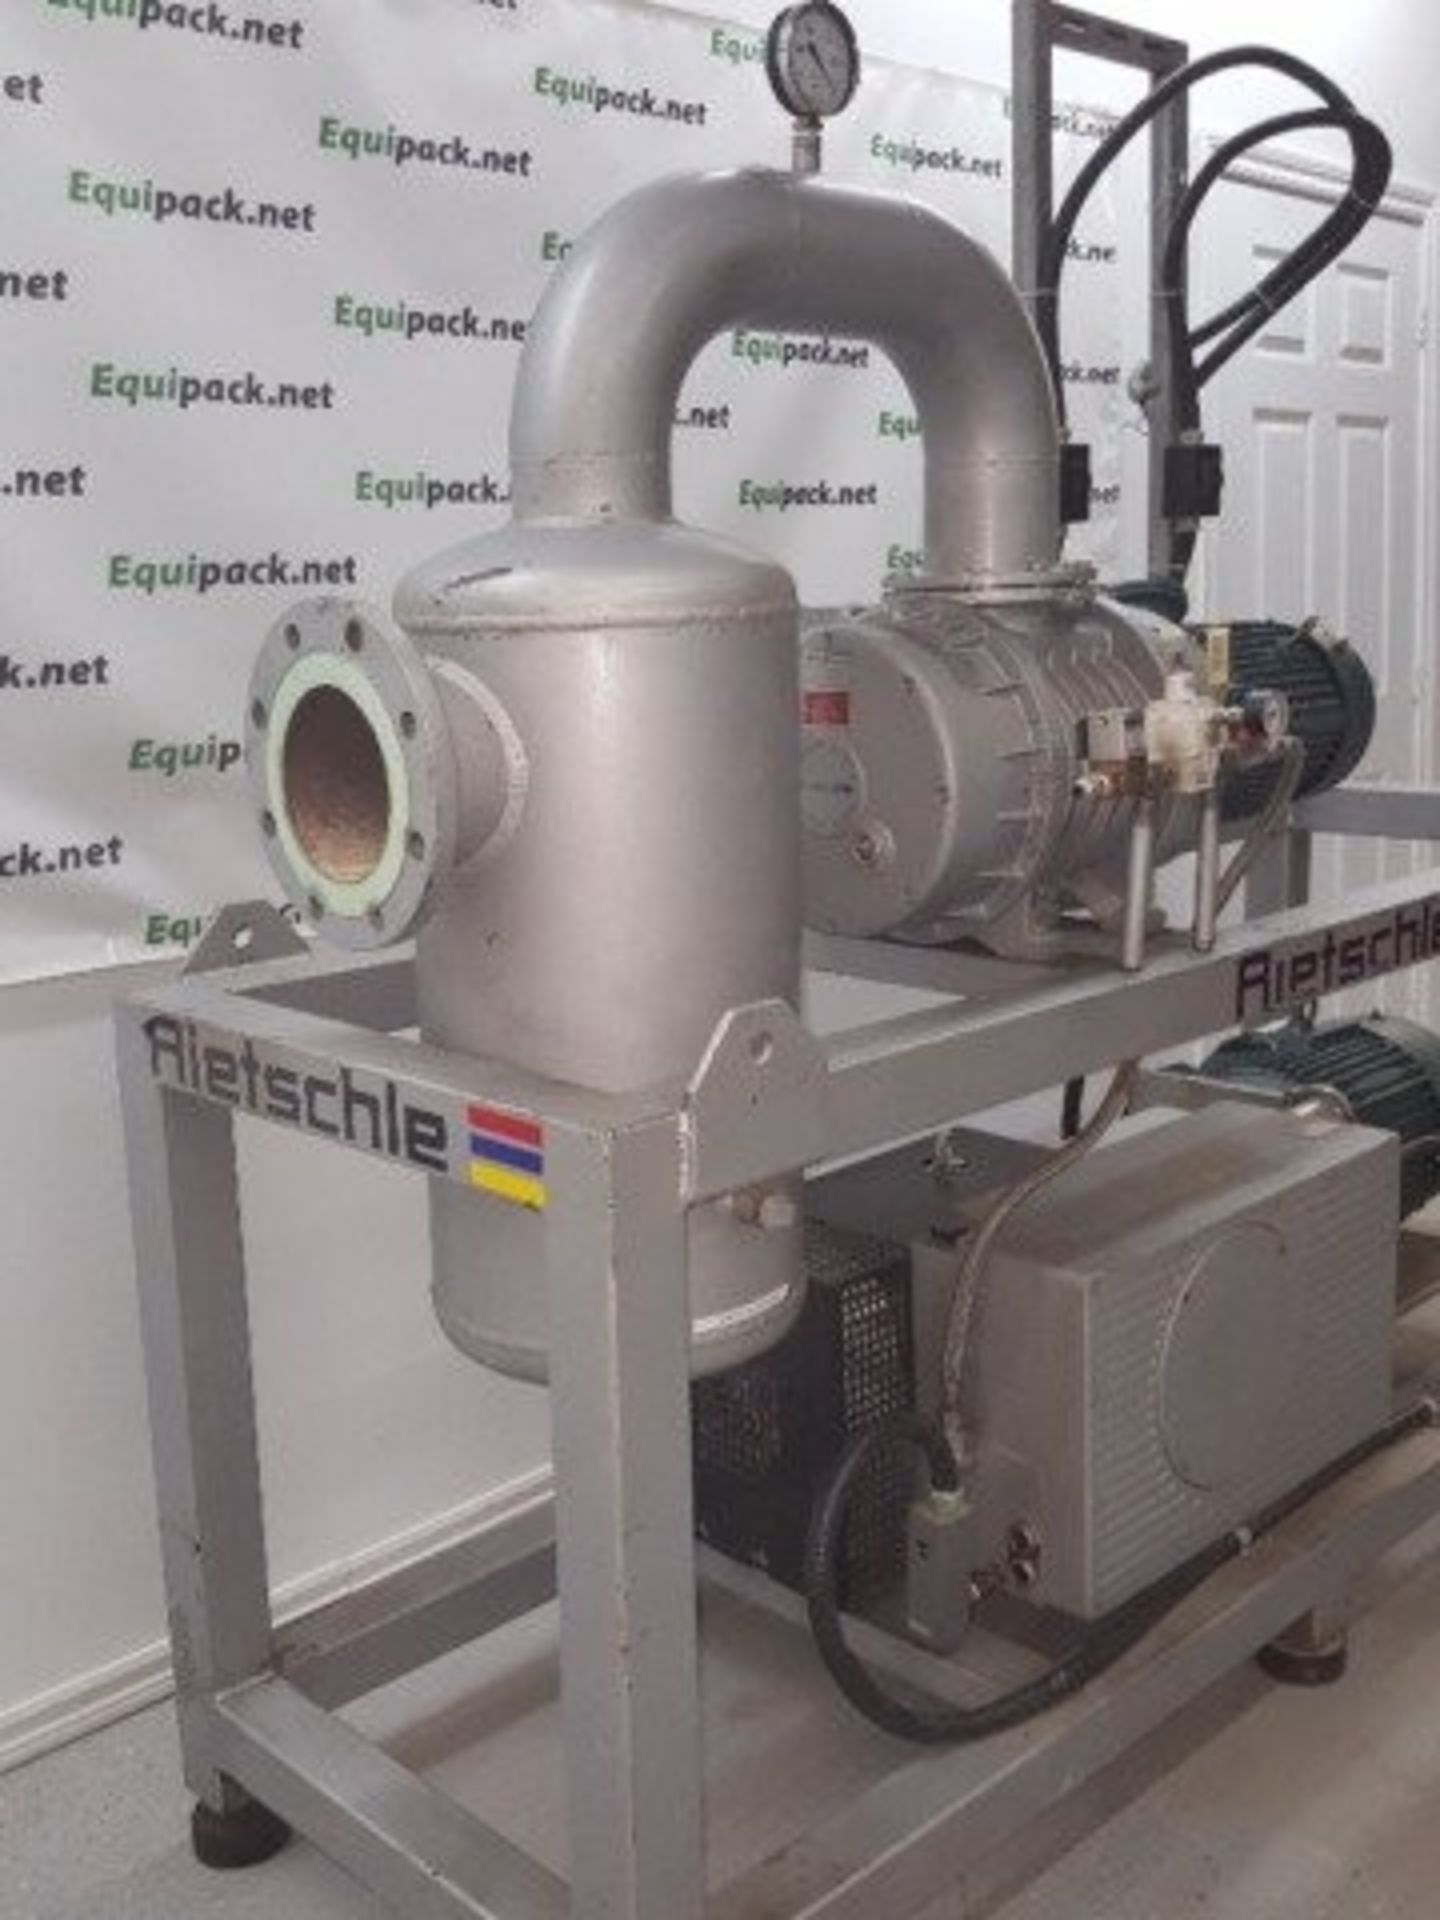 Rietschle Vacuum System modele VC300 01, 02567-0113 TYPE 1000 575volts / 5.20 / 3PH /60Hz 1 / SF 1, - Image 9 of 11